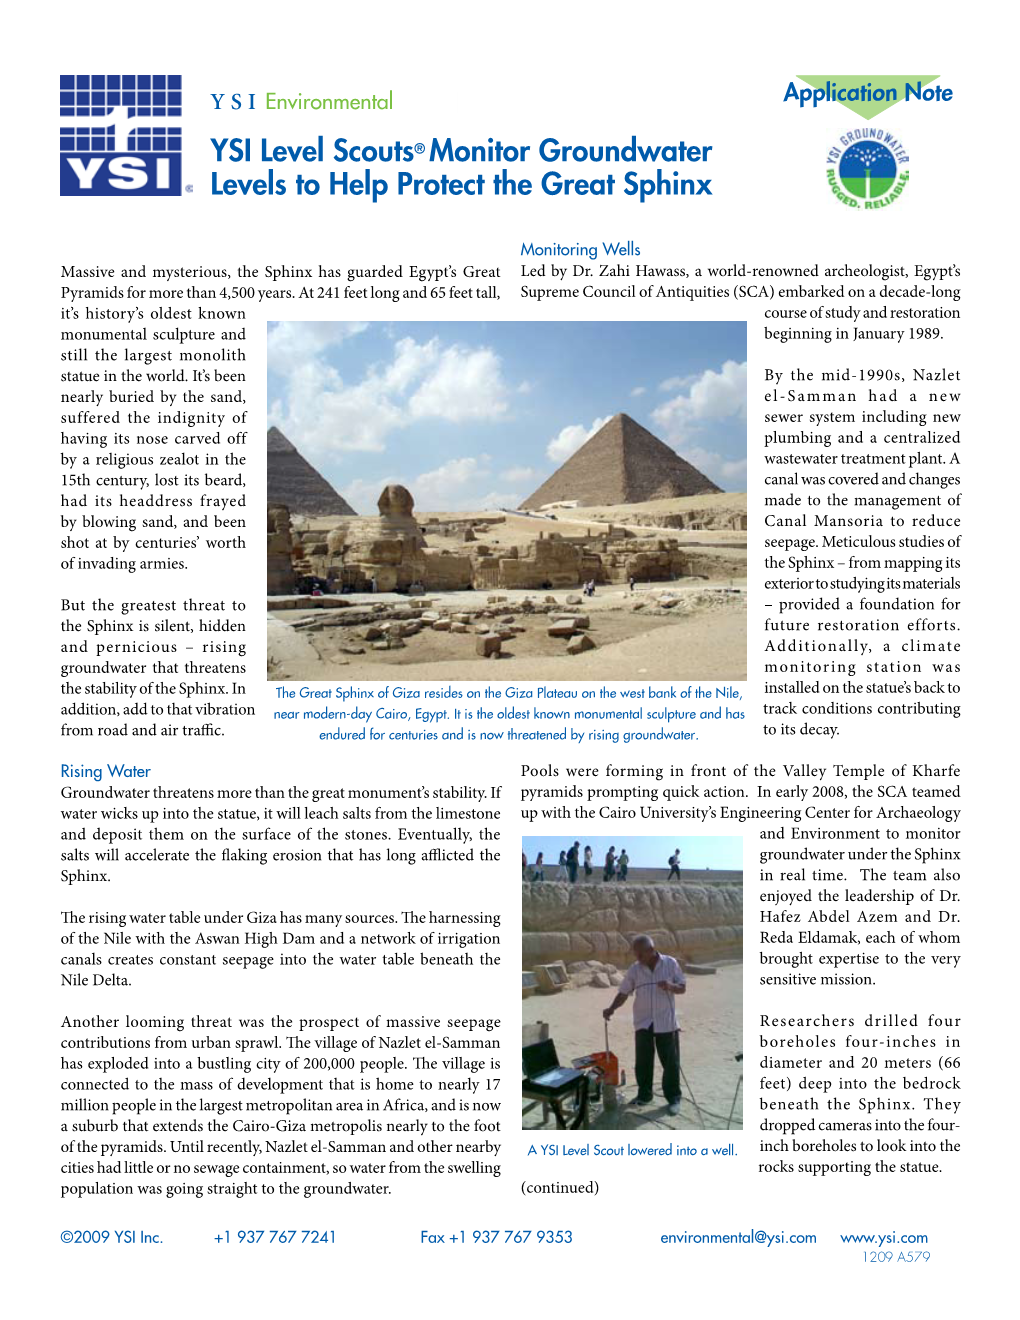 A579 YSI Level Scouts Monitor Groundwater Levels Beneath the Sphinx